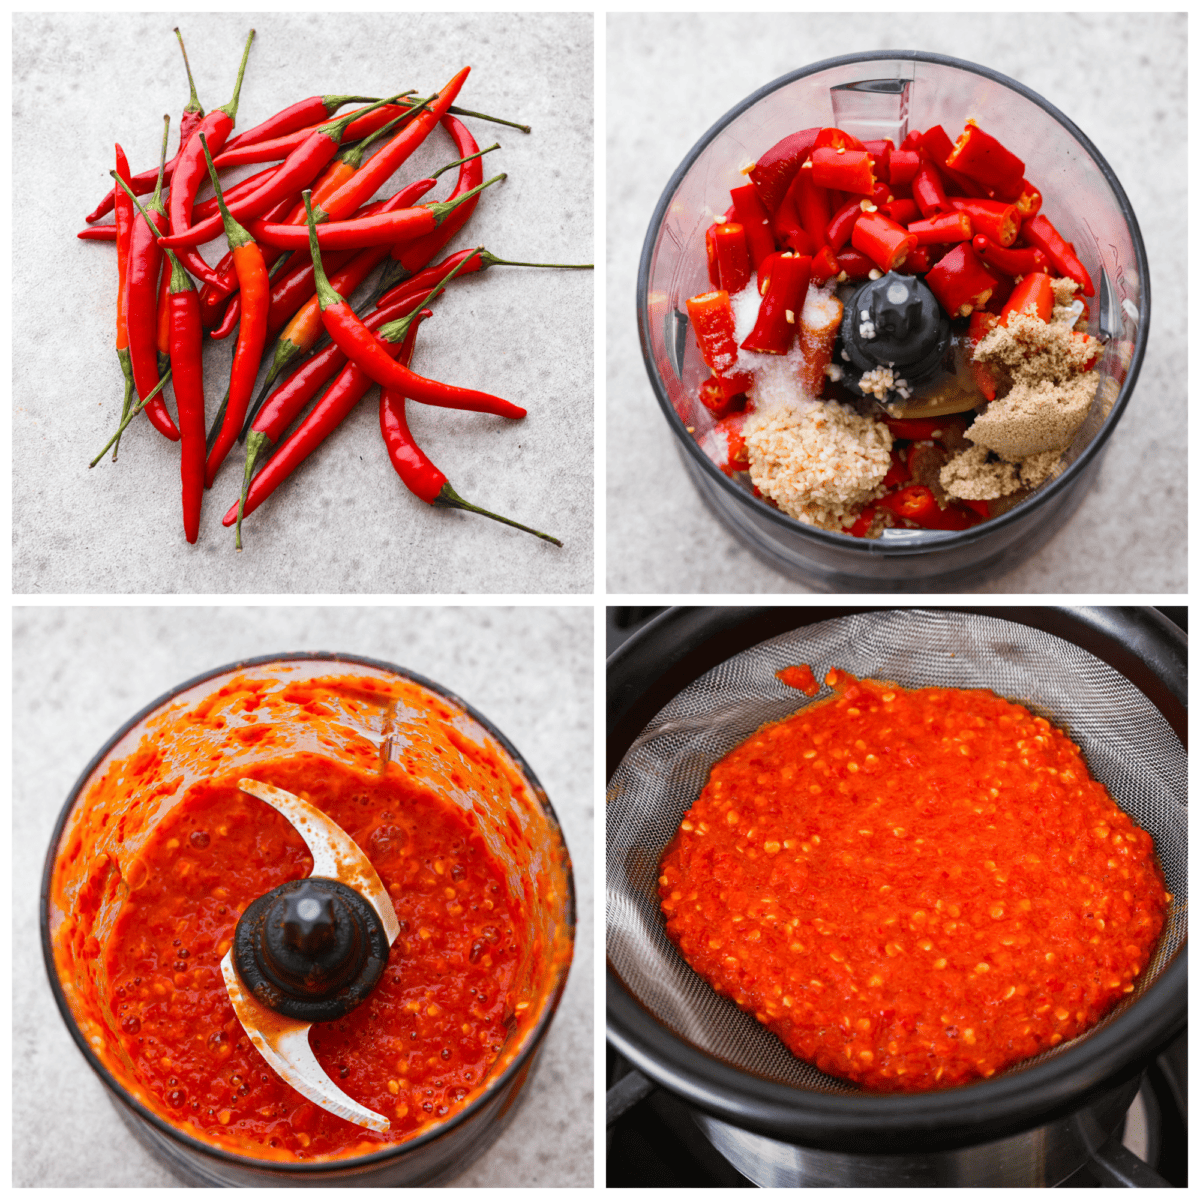 4-photo collage of the sauce ingredients being blended together.